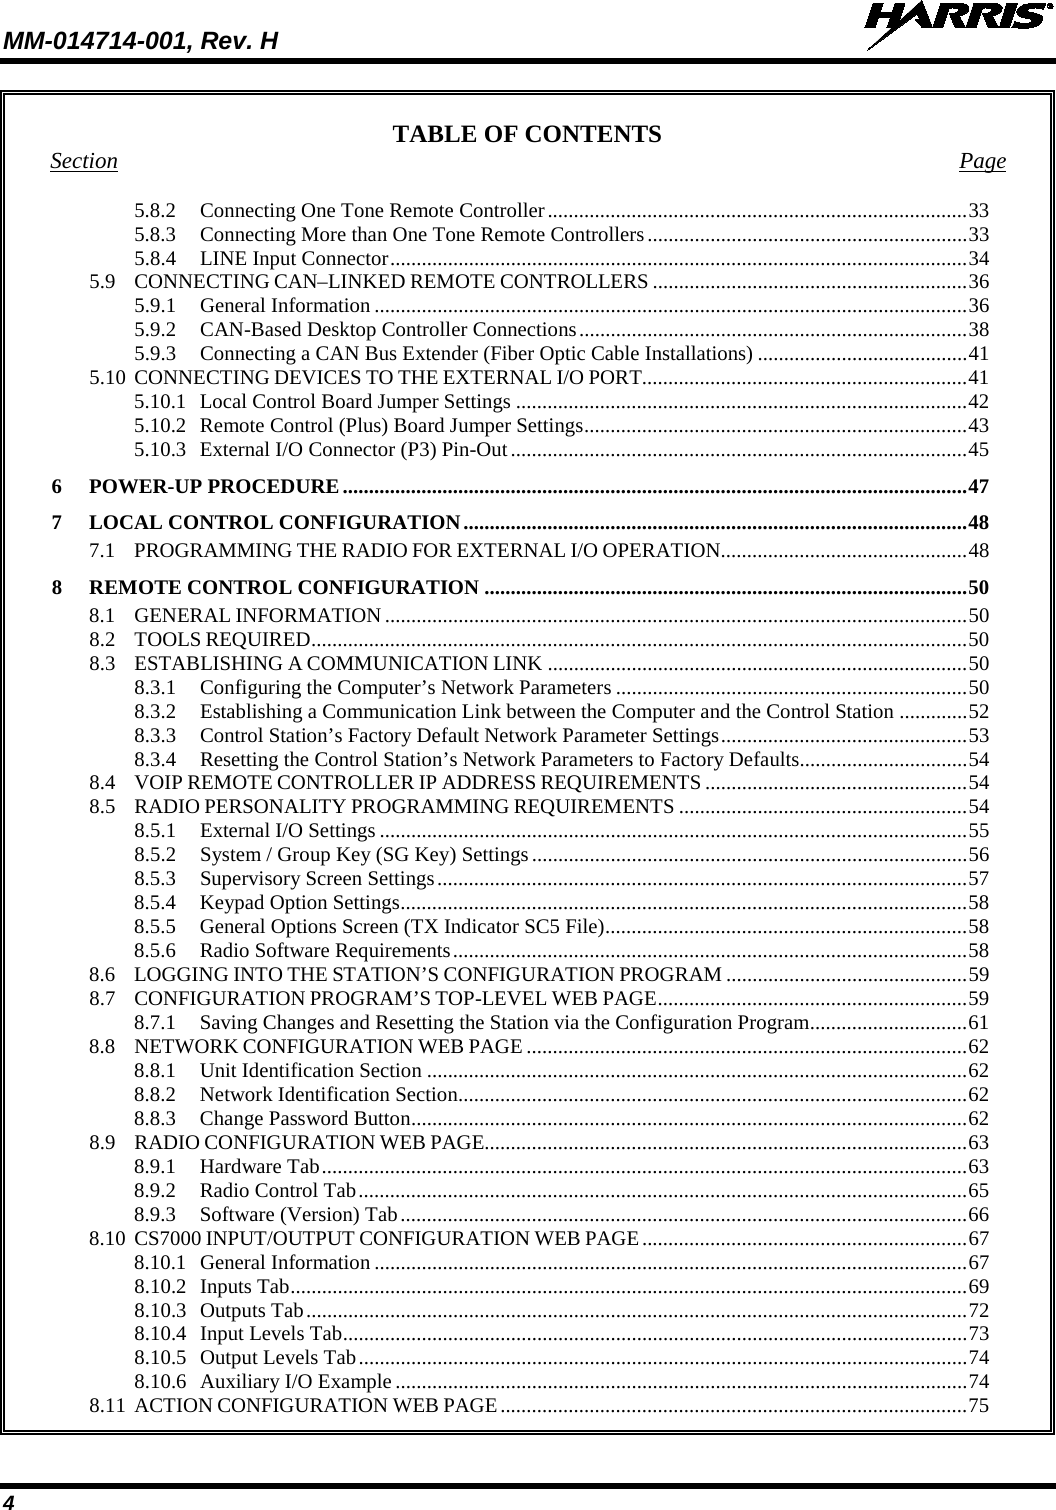 MM-014714-001, Rev. H   4 TABLE OF CONTENTS Section  Page 5.8.2 Connecting One Tone Remote Controller ................................................................................ 33 5.8.3 Connecting More than One Tone Remote Controllers ............................................................. 33 5.8.4 LINE Input Connector .............................................................................................................. 34 5.9 CONNECTING CAN–LINKED REMOTE CONTROLLERS ............................................................ 36 5.9.1 General Information ................................................................................................................. 36 5.9.2 CAN-Based Desktop Controller Connections .......................................................................... 38 5.9.3 Connecting a CAN Bus Extender (Fiber Optic Cable Installations) ........................................ 41 5.10 CONNECTING DEVICES TO THE EXTERNAL I/O PORT.............................................................. 41 5.10.1 Local Control Board Jumper Settings ...................................................................................... 42 5.10.2 Remote Control (Plus) Board Jumper Settings ......................................................................... 43 5.10.3 External I/O Connector (P3) Pin-Out ....................................................................................... 45 6  POWER-UP PROCEDURE ....................................................................................................................... 47 7  LOCAL CONTROL CONFIGURATION ................................................................................................ 48 7.1 PROGRAMMING THE RADIO FOR EXTERNAL I/O OPERATION............................................... 48 8  REMOTE CONTROL CONFIGURATION ............................................................................................ 50 8.1 GENERAL INFORMATION ............................................................................................................... 50 8.2 TOOLS REQUIRED ............................................................................................................................. 50 8.3 ESTABLISHING A COMMUNICATION LINK ................................................................................ 50 8.3.1 Configuring the Computer’s Network Parameters ................................................................... 50 8.3.2 Establishing a Communication Link between the Computer and the Control Station ............. 52 8.3.3 Control Station’s Factory Default Network Parameter Settings ............................................... 53 8.3.4 Resetting the Control Station’s Network Parameters to Factory Defaults................................ 54 8.4 VOIP REMOTE CONTROLLER IP ADDRESS REQUIREMENTS .................................................. 54 8.5 RADIO PERSONALITY PROGRAMMING REQUIREMENTS ....................................................... 54 8.5.1 External I/O Settings ................................................................................................................ 55 8.5.2 System / Group Key (SG Key) Settings ................................................................................... 56 8.5.3 Supervisory Screen Settings ..................................................................................................... 57 8.5.4 Keypad Option Settings ............................................................................................................ 58 8.5.5 General Options Screen (TX Indicator SC5 File) ..................................................................... 58 8.5.6 Radio Software Requirements .................................................................................................. 58 8.6 LOGGING INTO THE STATION’S CONFIGURATION PROGRAM .............................................. 59 8.7 CONFIGURATION PROGRAM’S TOP-LEVEL WEB PAGE ........................................................... 59 8.7.1 Saving Changes and Resetting the Station via the Configuration Program .............................. 61 8.8 NETWORK CONFIGURATION WEB PAGE .................................................................................... 62 8.8.1 Unit Identification Section ....................................................................................................... 62 8.8.2 Network Identification Section................................................................................................. 62 8.8.3 Change Password Button .......................................................................................................... 62 8.9 RADIO CONFIGURATION WEB PAGE............................................................................................ 63 8.9.1 Hardware Tab ........................................................................................................................... 63 8.9.2 Radio Control Tab .................................................................................................................... 65 8.9.3 Software (Version) Tab ............................................................................................................ 66 8.10 CS7000 INPUT/OUTPUT CONFIGURATION WEB PAGE .............................................................. 67 8.10.1 General Information ................................................................................................................. 67 8.10.2 Inputs Tab ................................................................................................................................. 69 8.10.3 Outputs Tab .............................................................................................................................. 72 8.10.4 Input Levels Tab ....................................................................................................................... 73 8.10.5 Output Levels Tab .................................................................................................................... 74 8.10.6 Auxiliary I/O Example ............................................................................................................. 74 8.11 ACTION CONFIGURATION WEB PAGE ......................................................................................... 75 